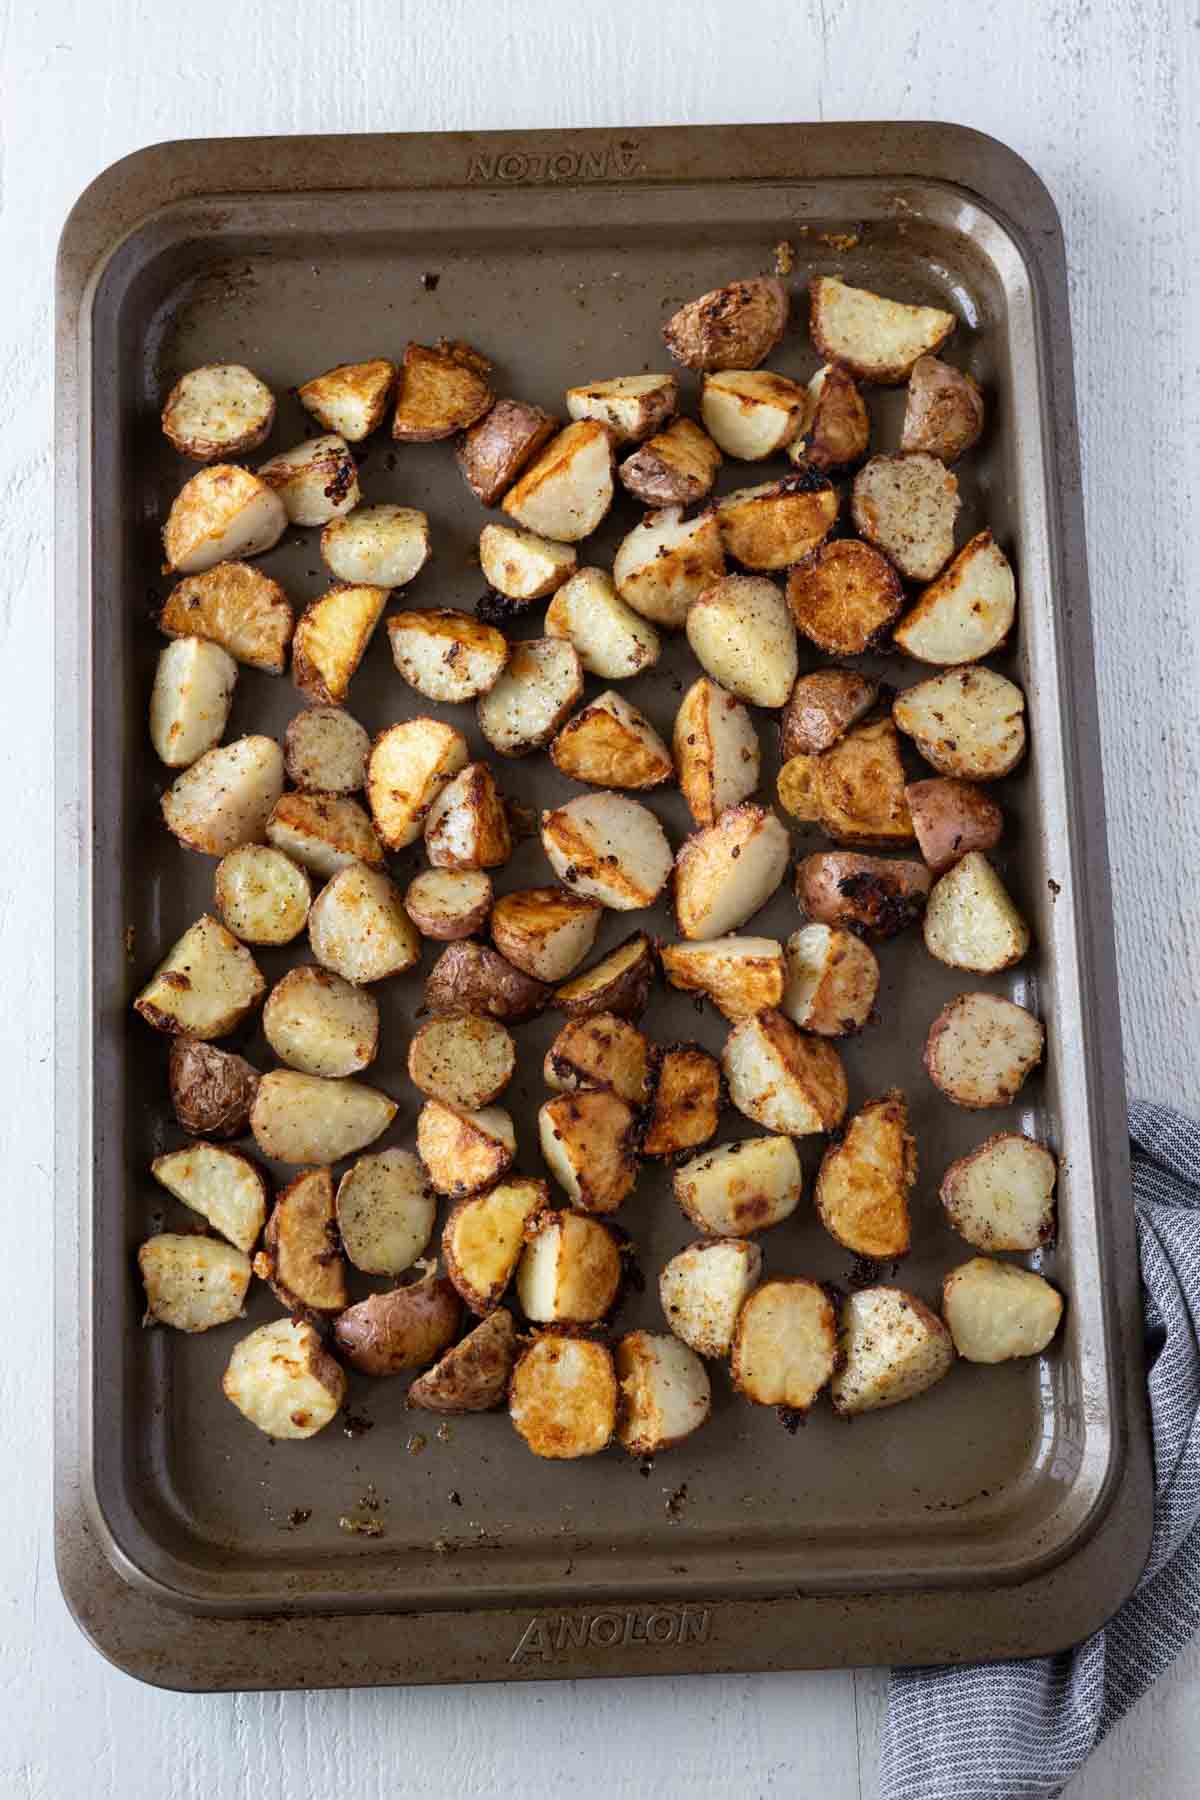 Golden brown roasted potatoes on cookie sheet.